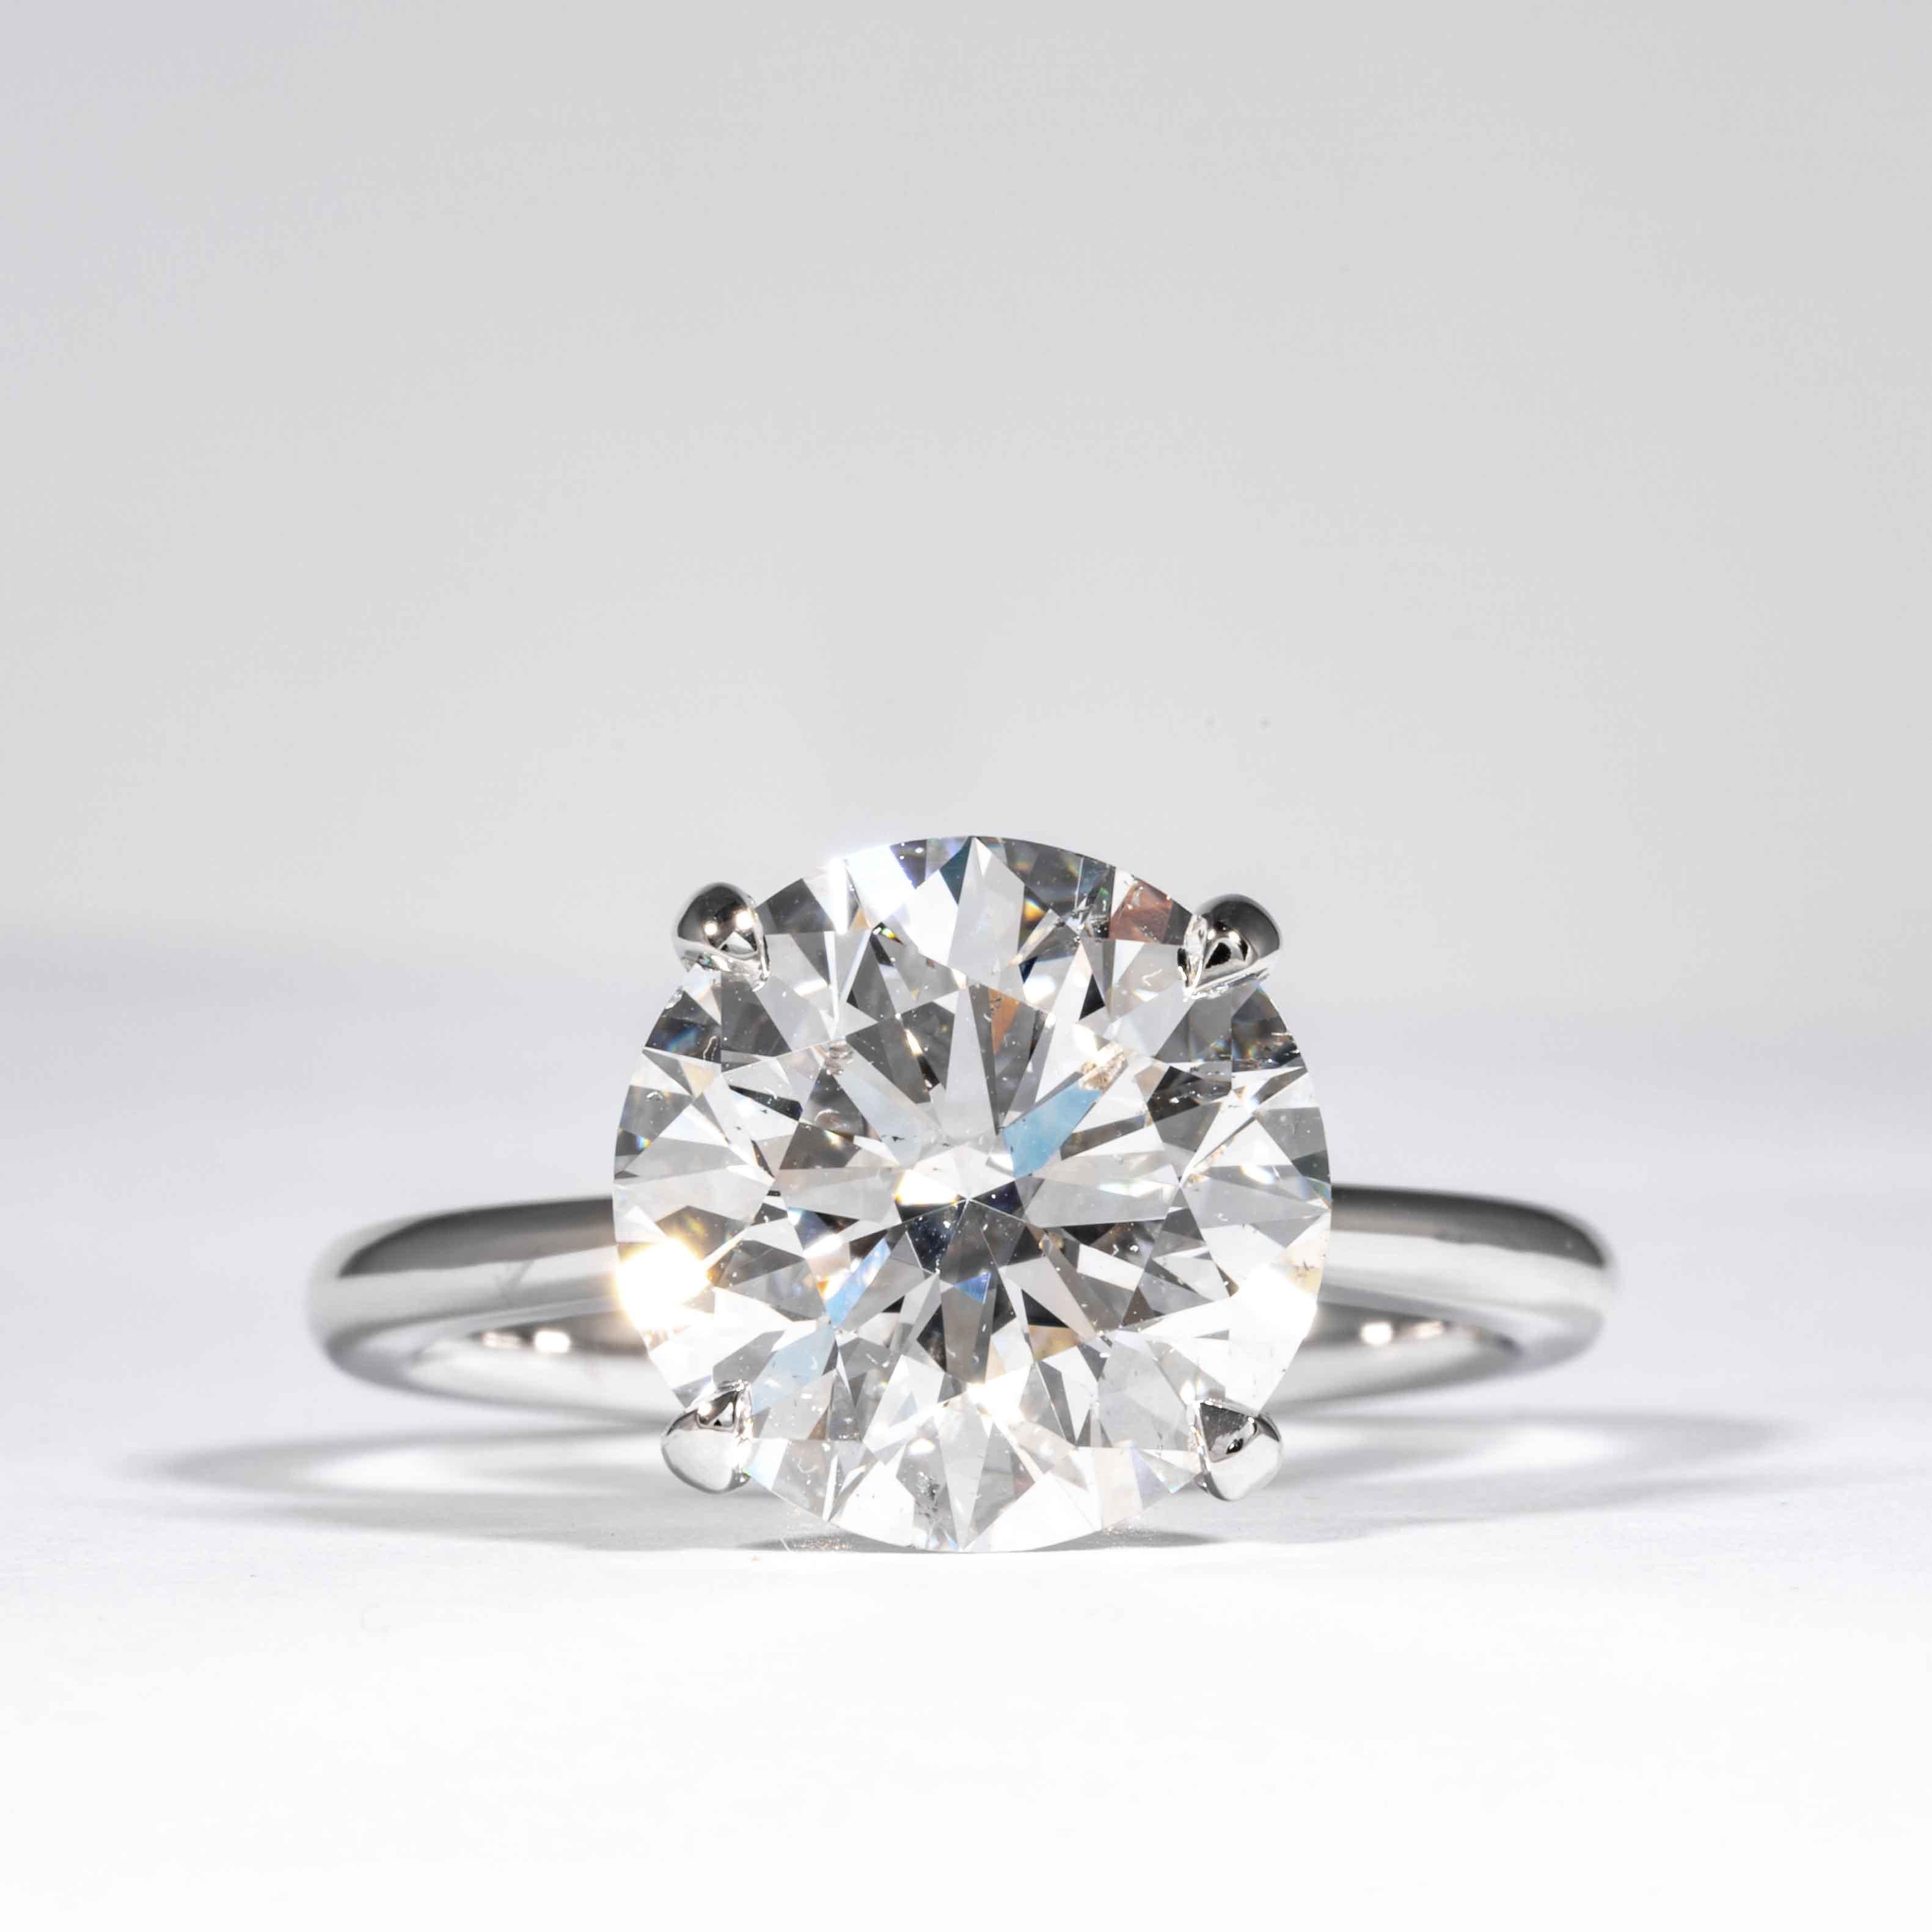 This elegant and classic diamond ring is offered by Shreve, Crump & Low. This 5.12 carat GIA certified E SI1 round brilliant cut diamond measuring 11.05 x 11.08 x 6.84 mm is custom set in a handcrafted Shreve, Crump & Low 18 karat white gold 4-prong